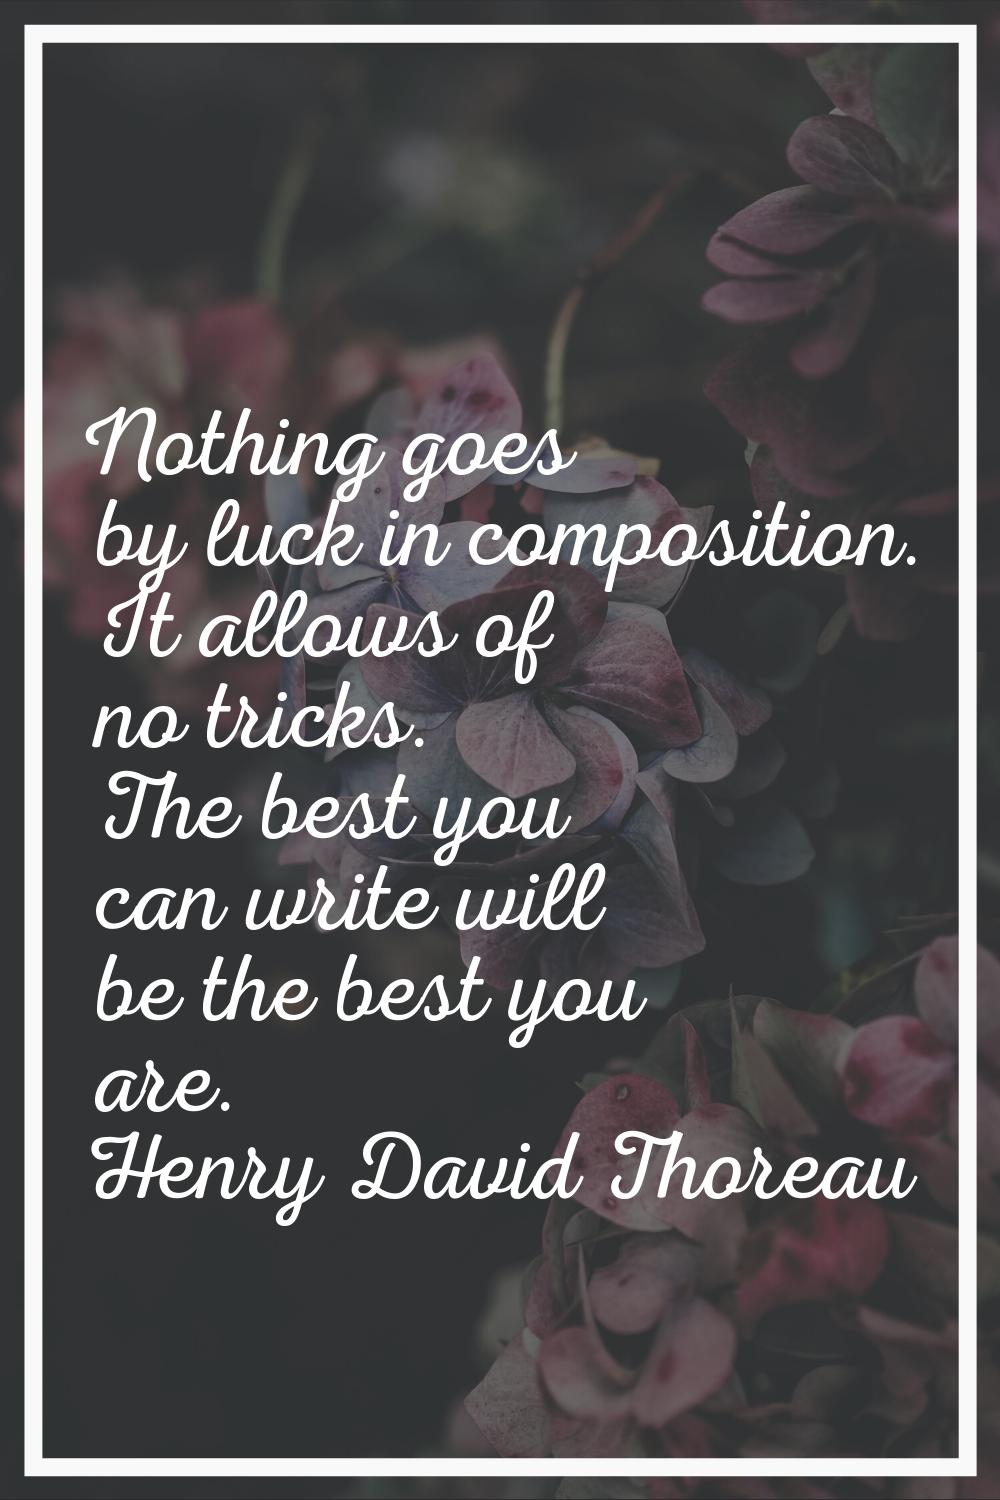 Nothing goes by luck in composition. It allows of no tricks. The best you can write will be the bes